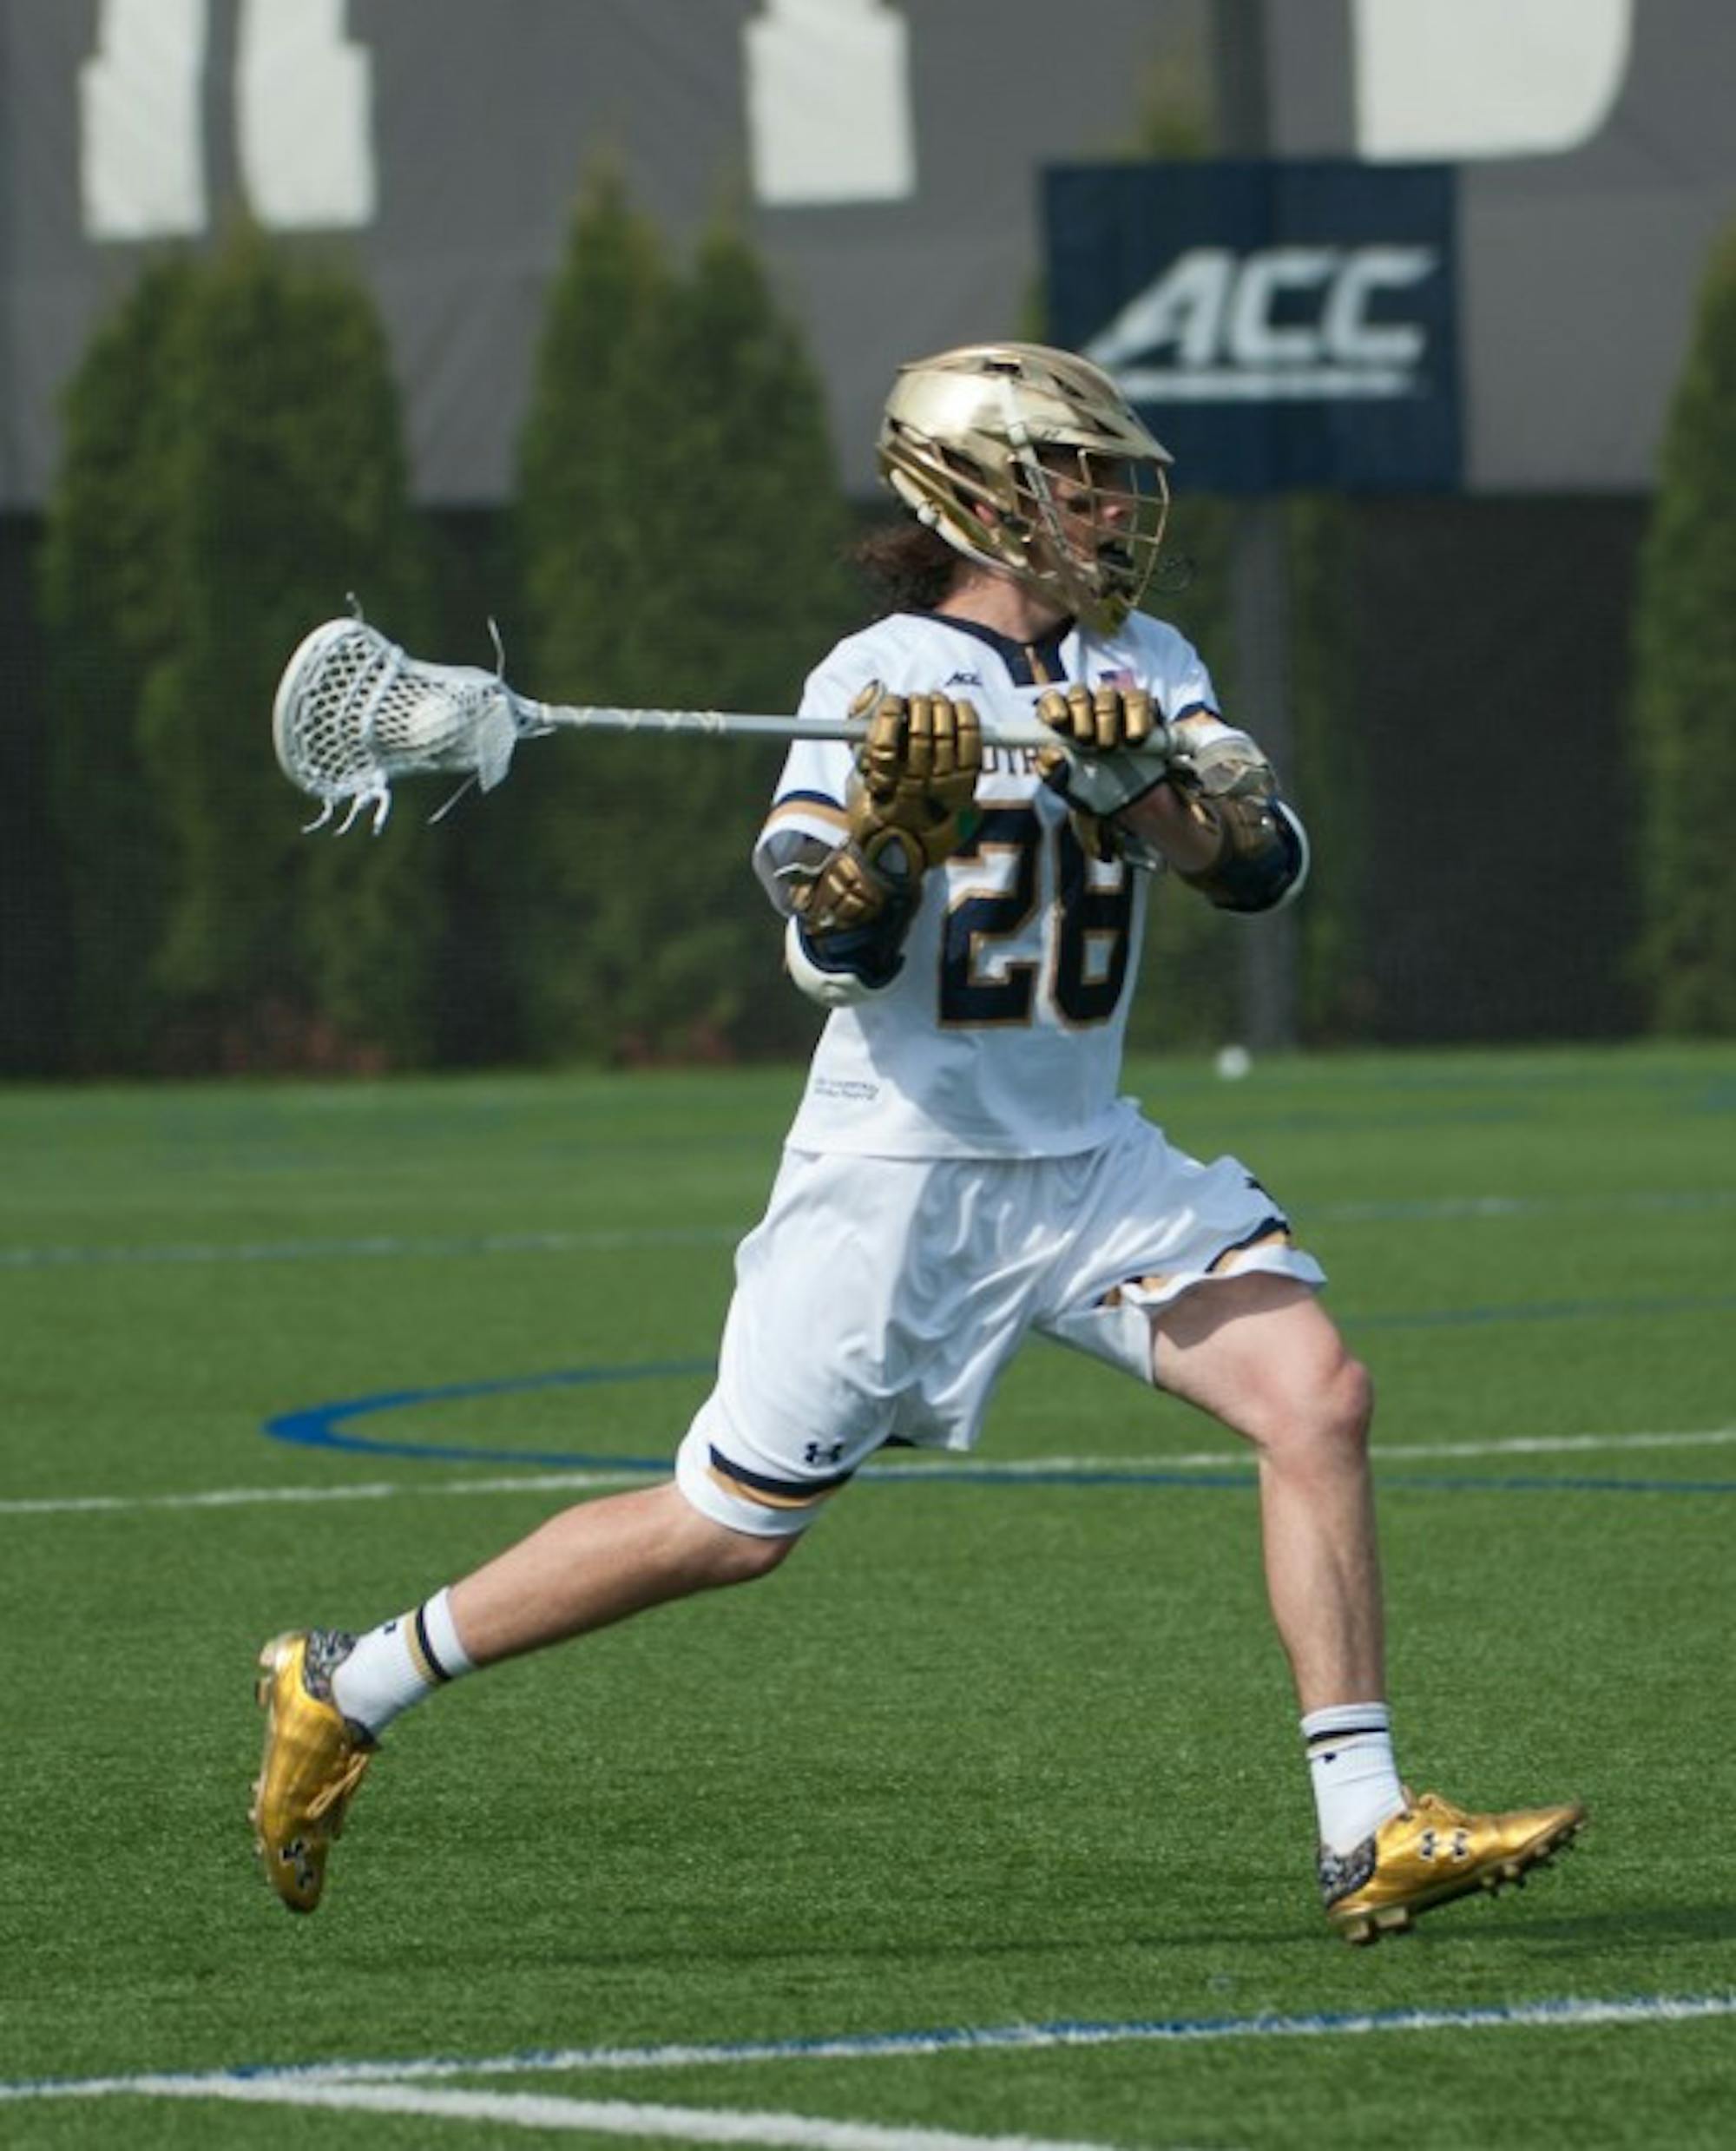 Senior attack Conor Doyle looks to pass in a 15-14 win against North Carolina on Sunday. Doyle had three goals in the victory.